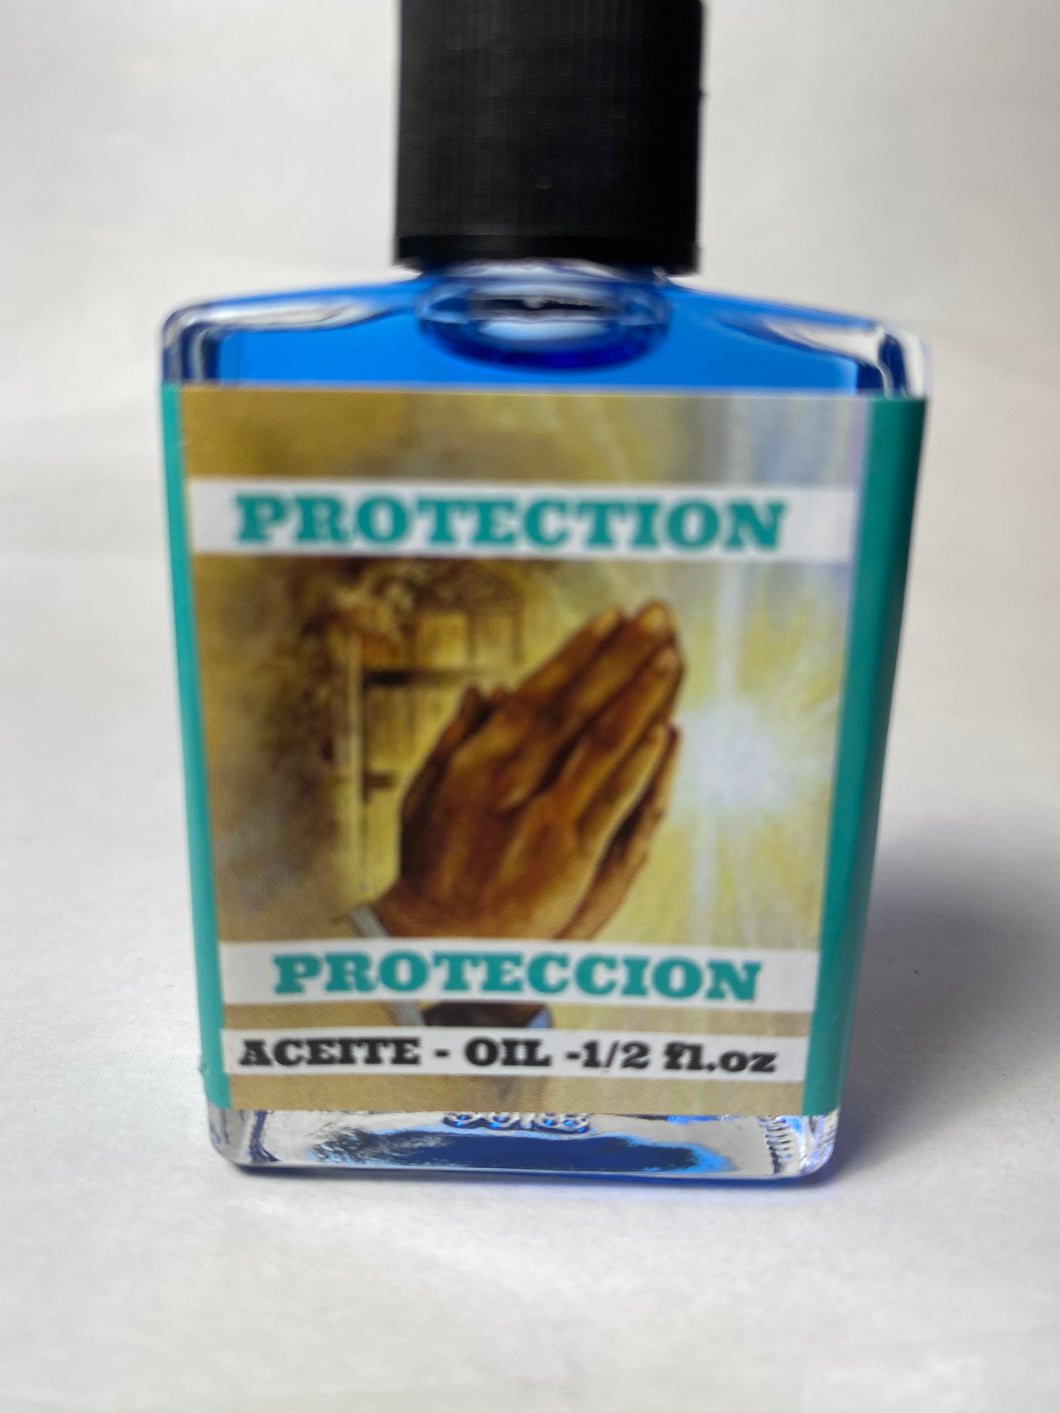 PROTECTION oil